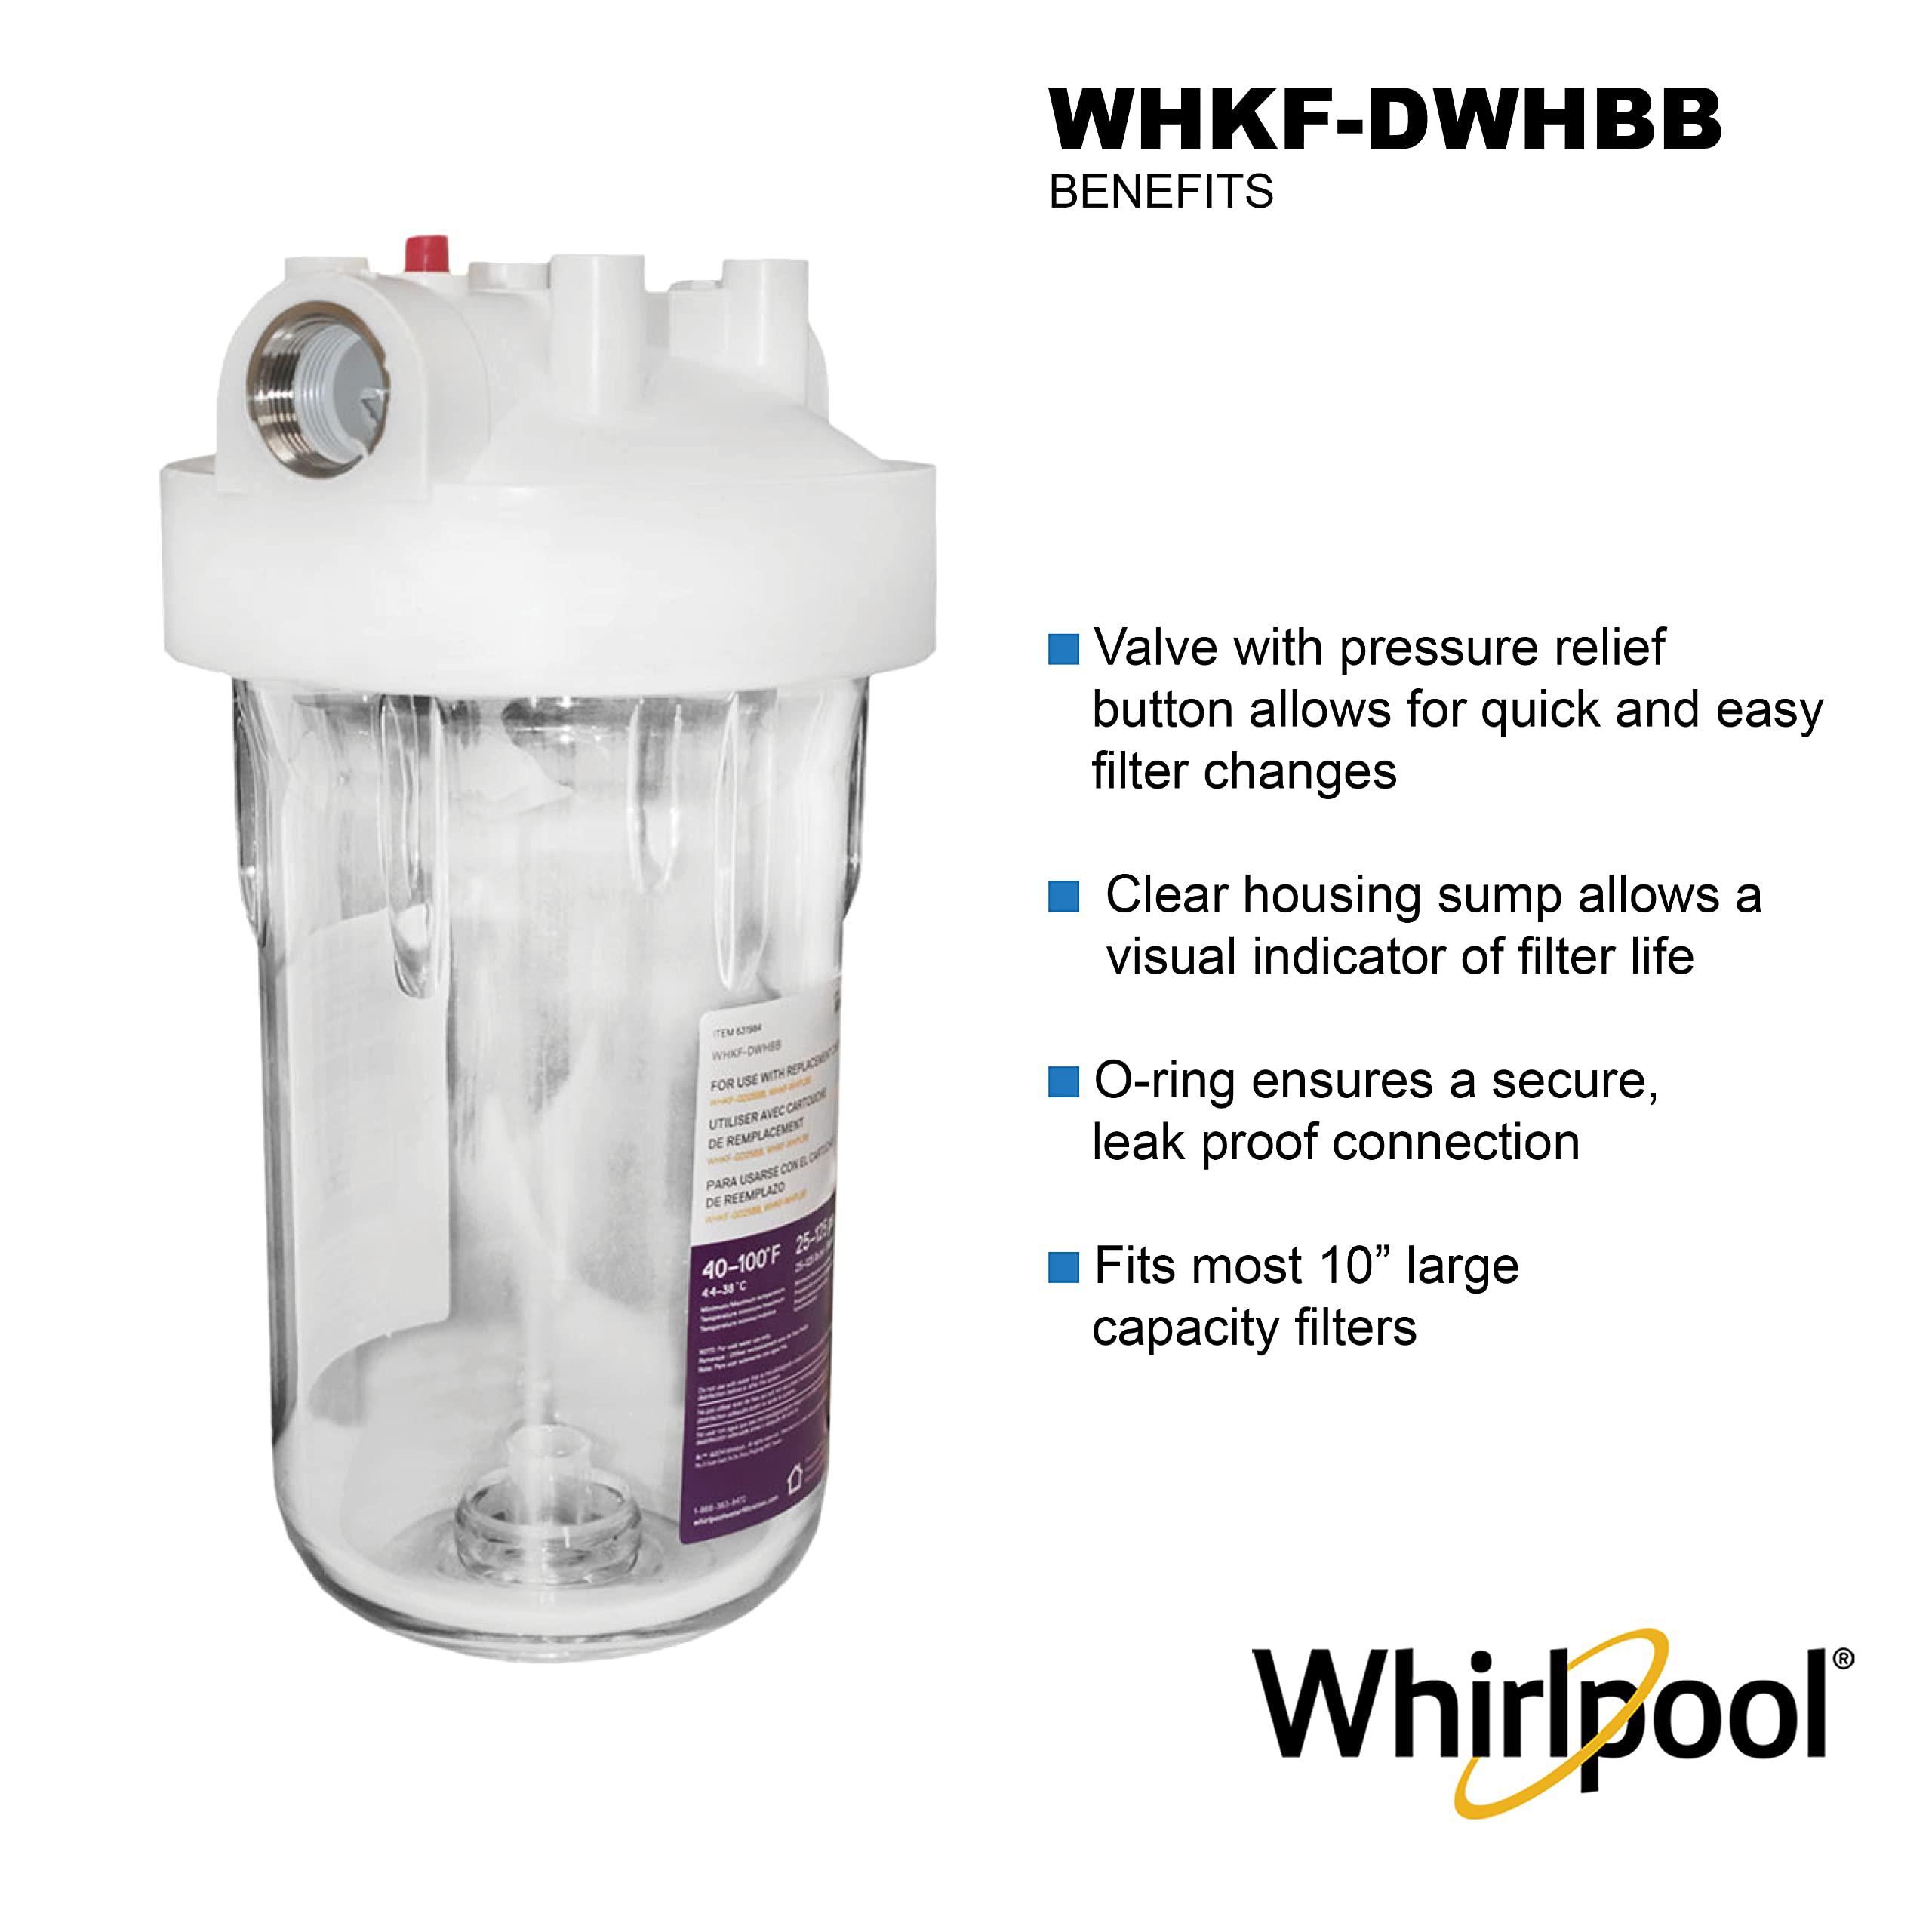 whirlpool large capacity whole house filtration system | whkf-dwhbb-timer, installation kit & reminder included | reduces sed